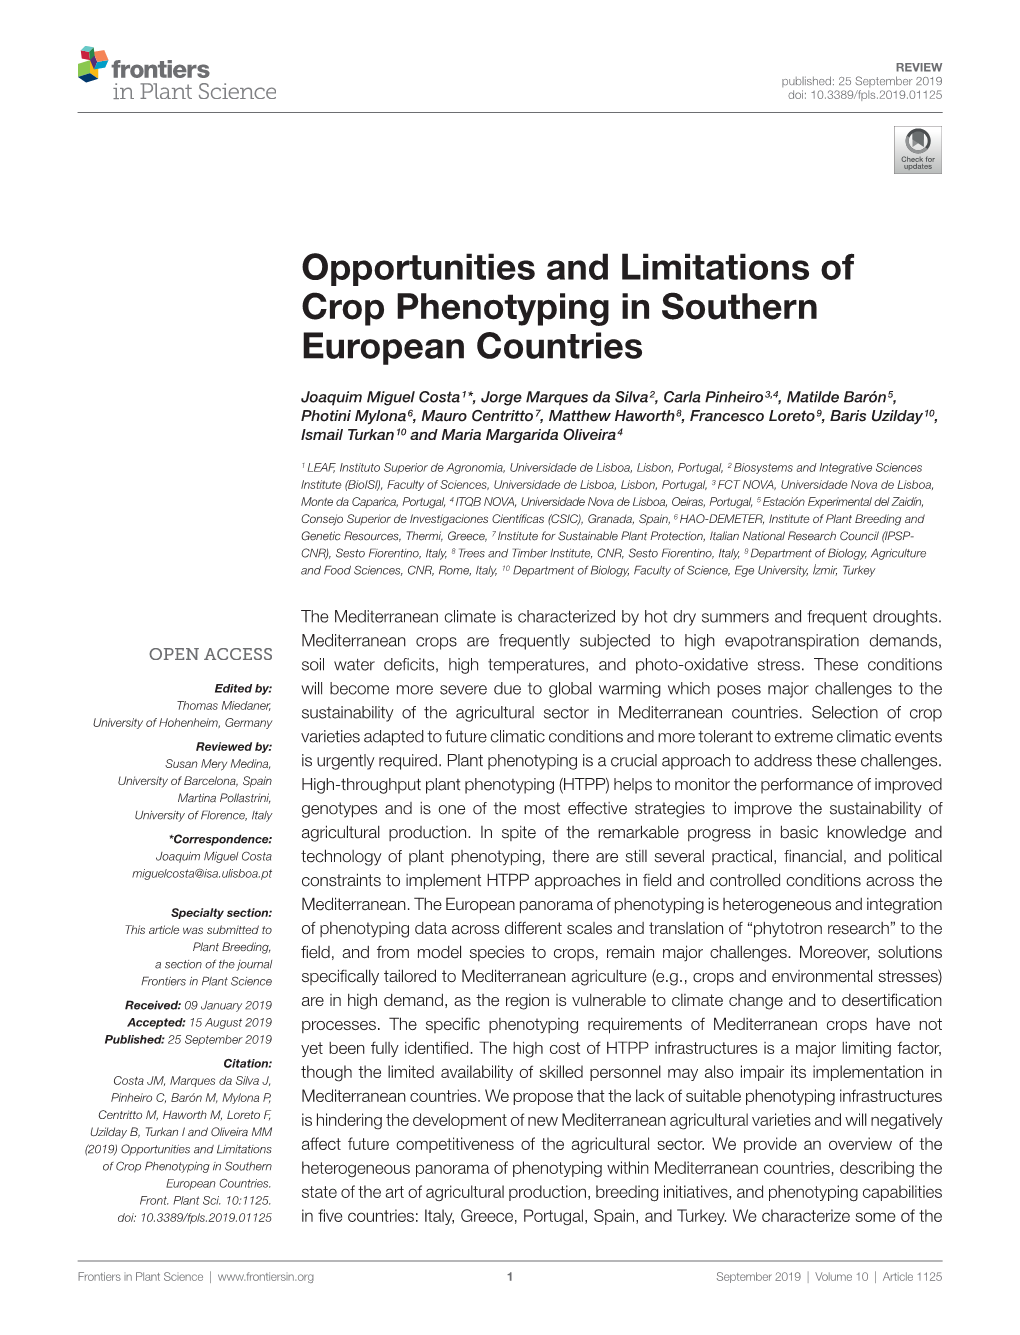 Opportunities and Limitations of Crop Phenotyping in Southern European Countries